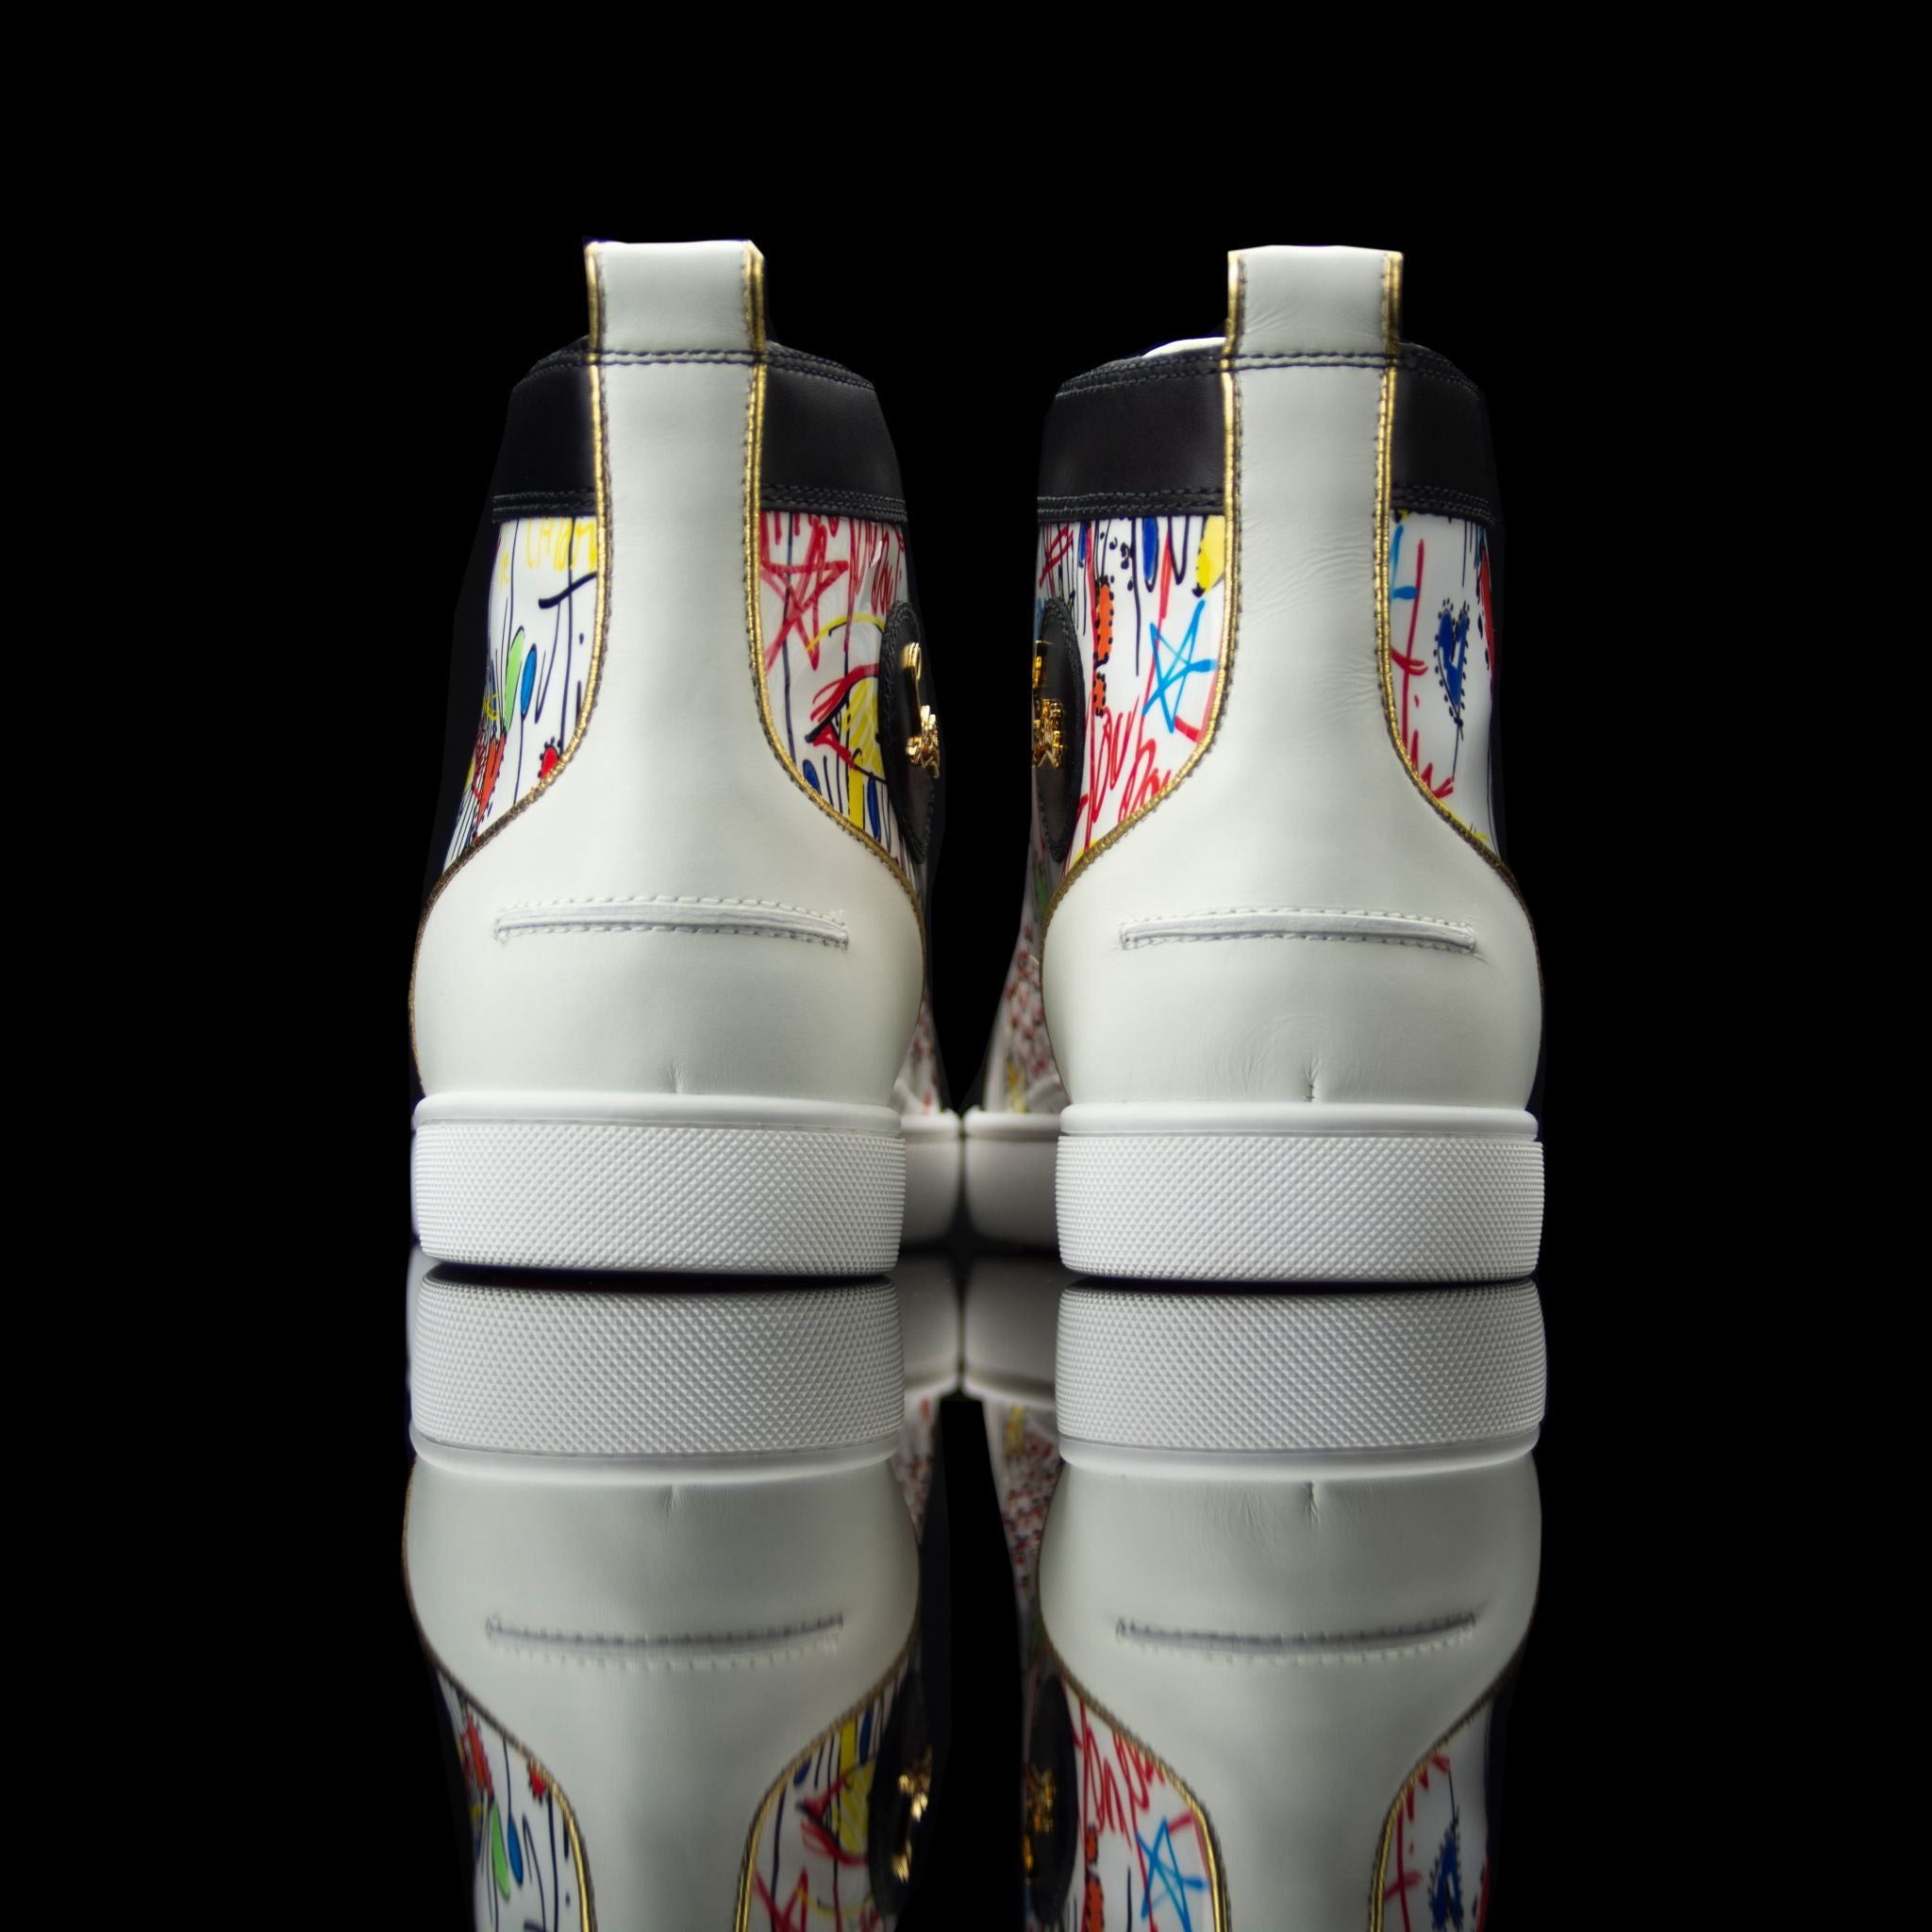 Christian Louboutin-Louis Flat High-Product Code: 1180212 Colour: White/Multi Release Date: 2017 Material: Patent Leather, Suede, Rubber Sole-fabriqe.com